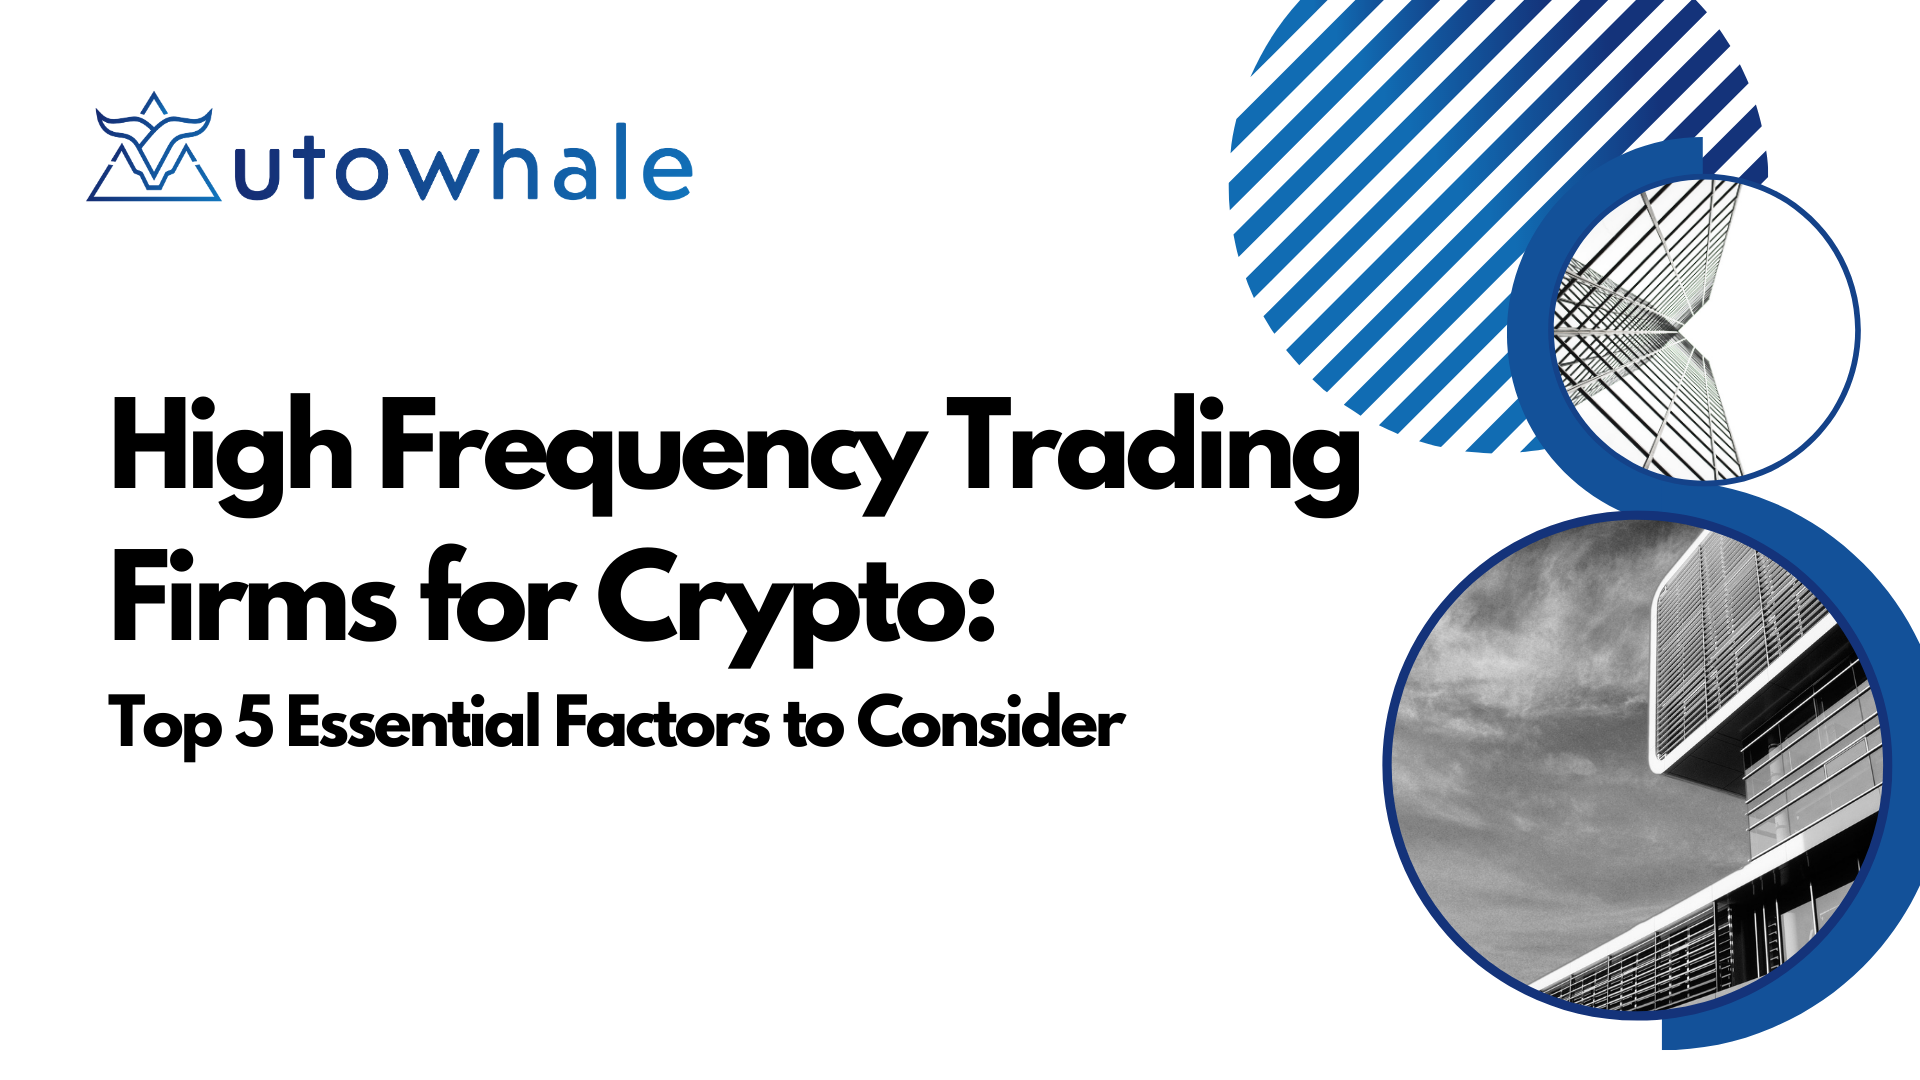 Cryptocurrency trading is becoming increasingly popular right now and with it, the high demand for the right (HFT) high frequency trading firms to help traders and institutions maximize their profits.